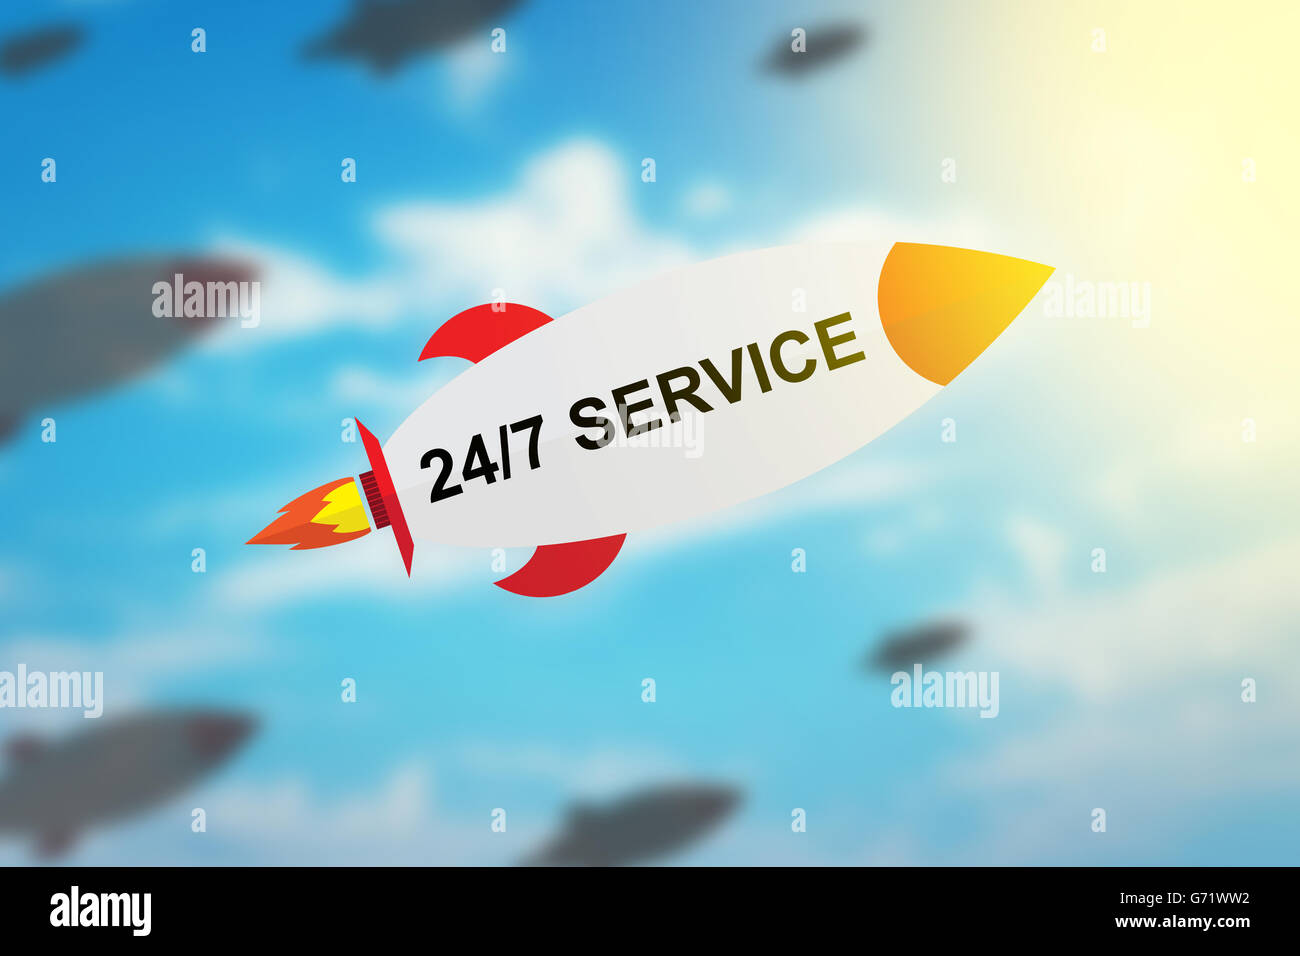 group of 24 hours a day, 7 days a week service flat design rocket with blurred background and soft light effect Stock Photo